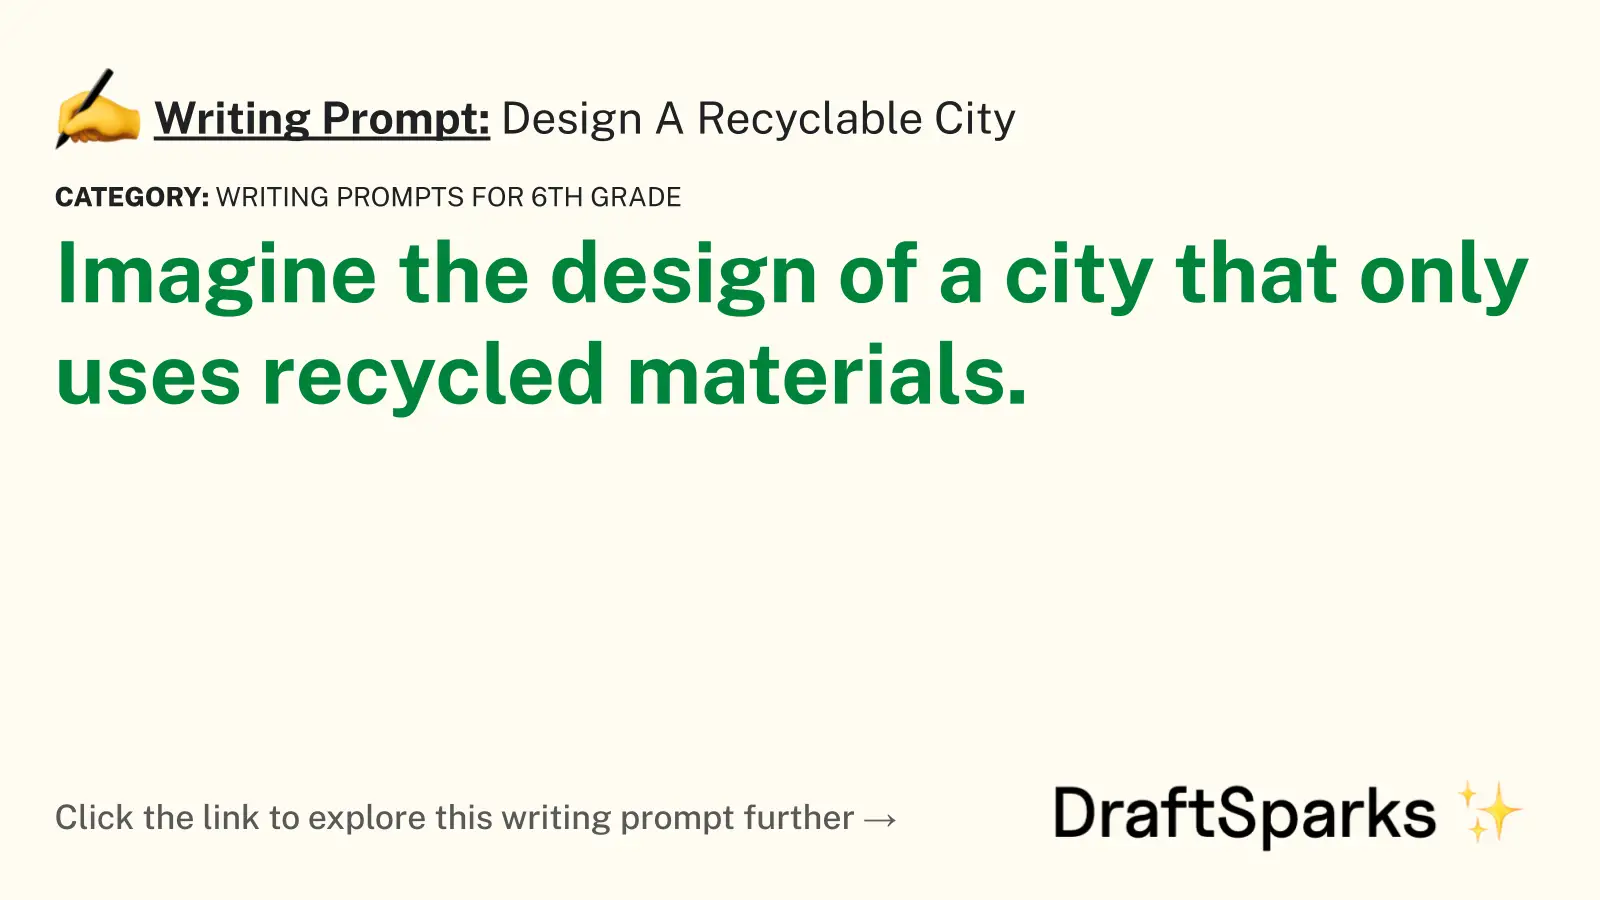 Design A Recyclable City